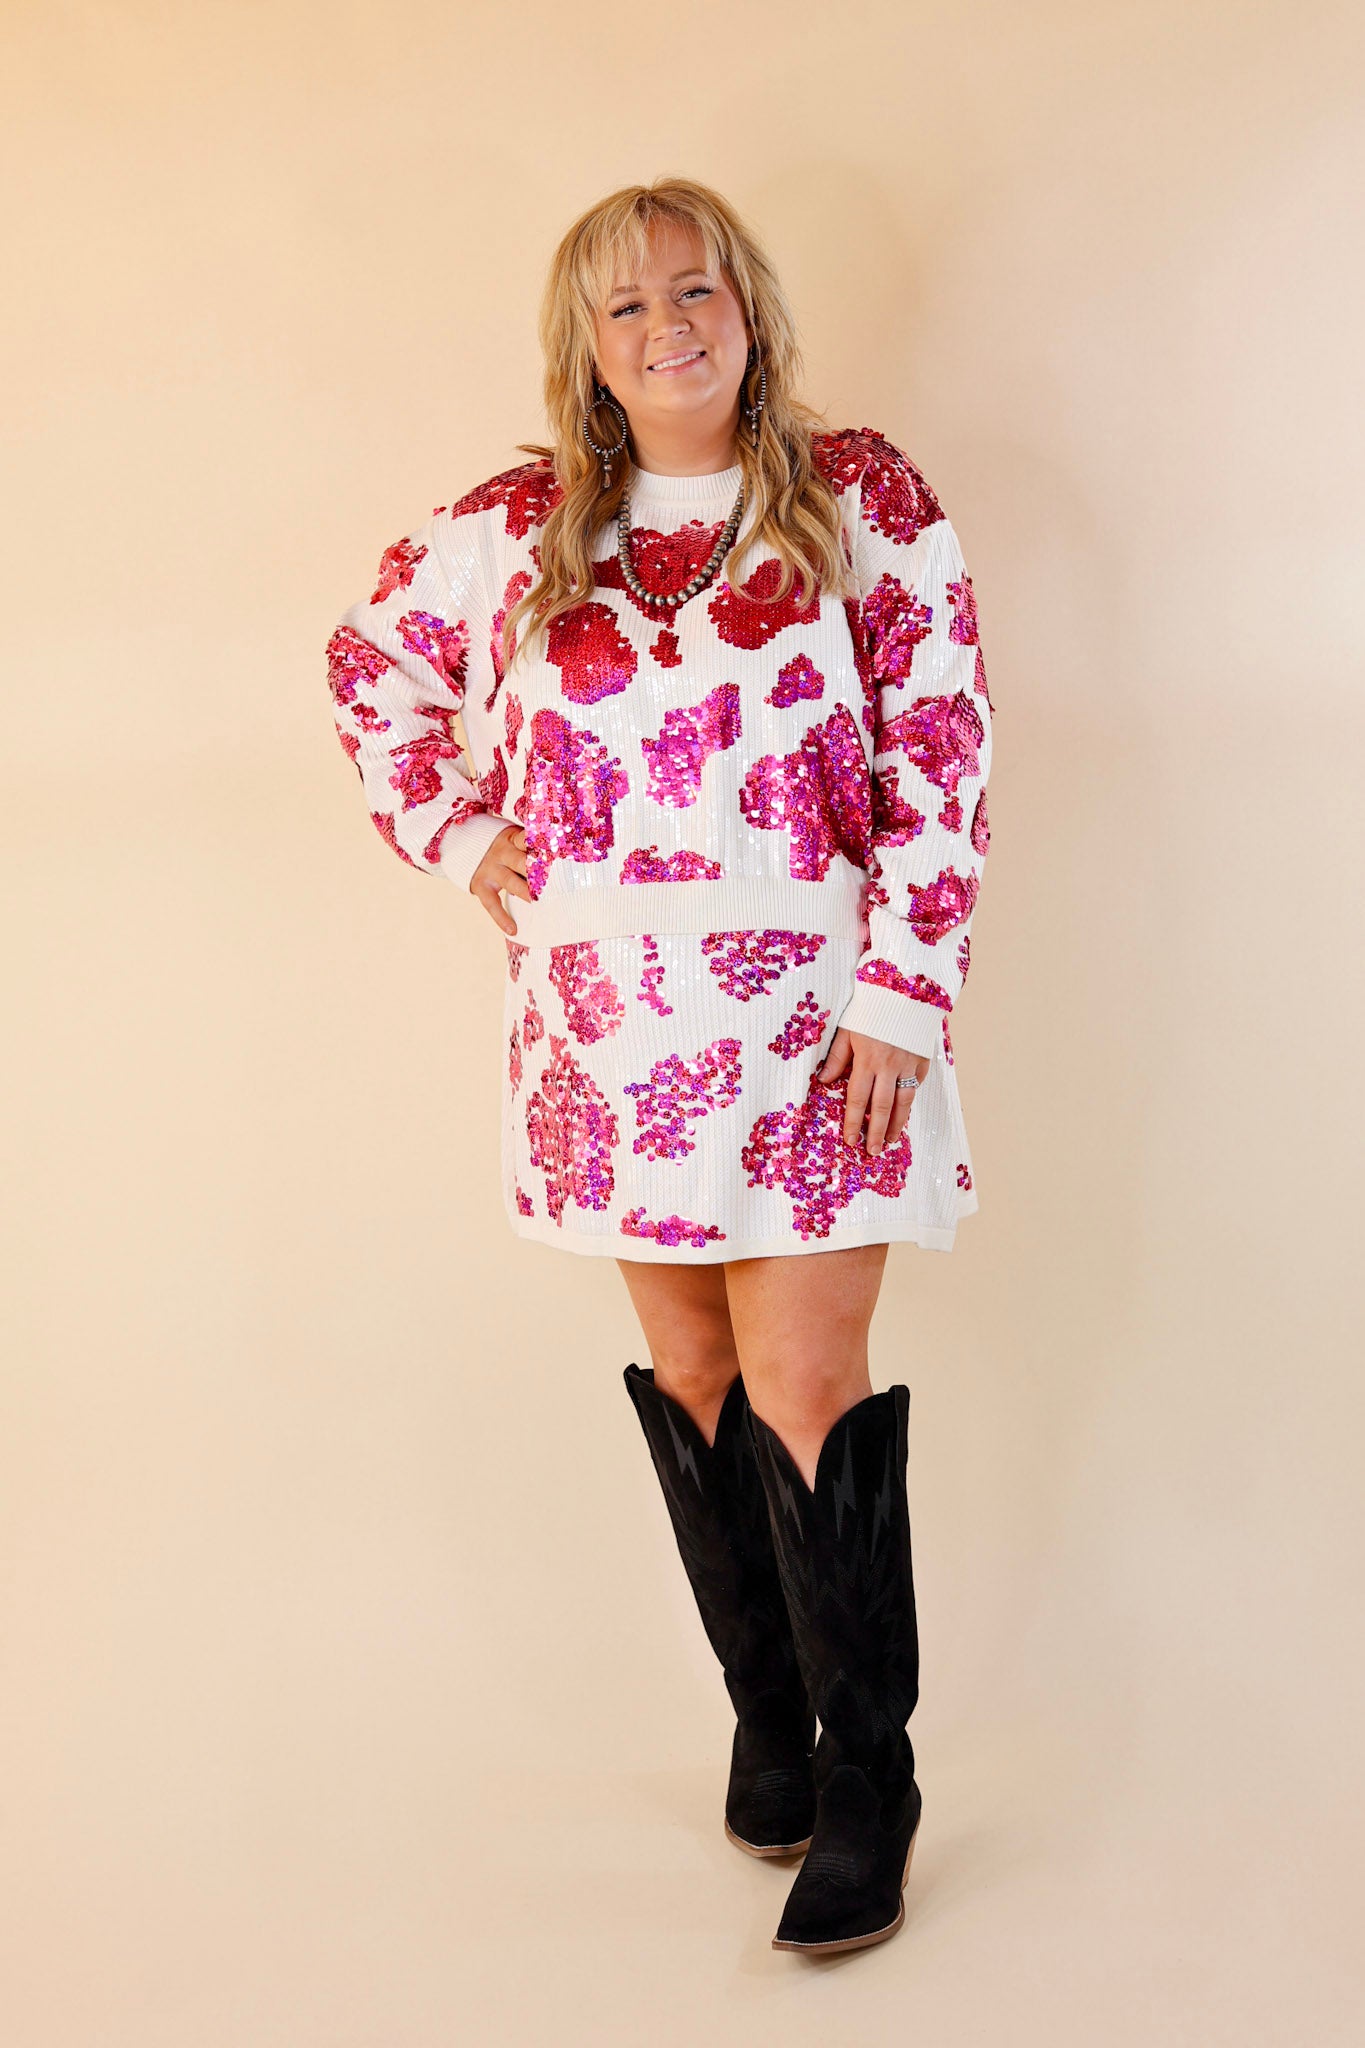 Queen Of Sparkles | Cow Print Long Sleeve Graphic Sweater in White & Hot Pink - Giddy Up Glamour Boutique